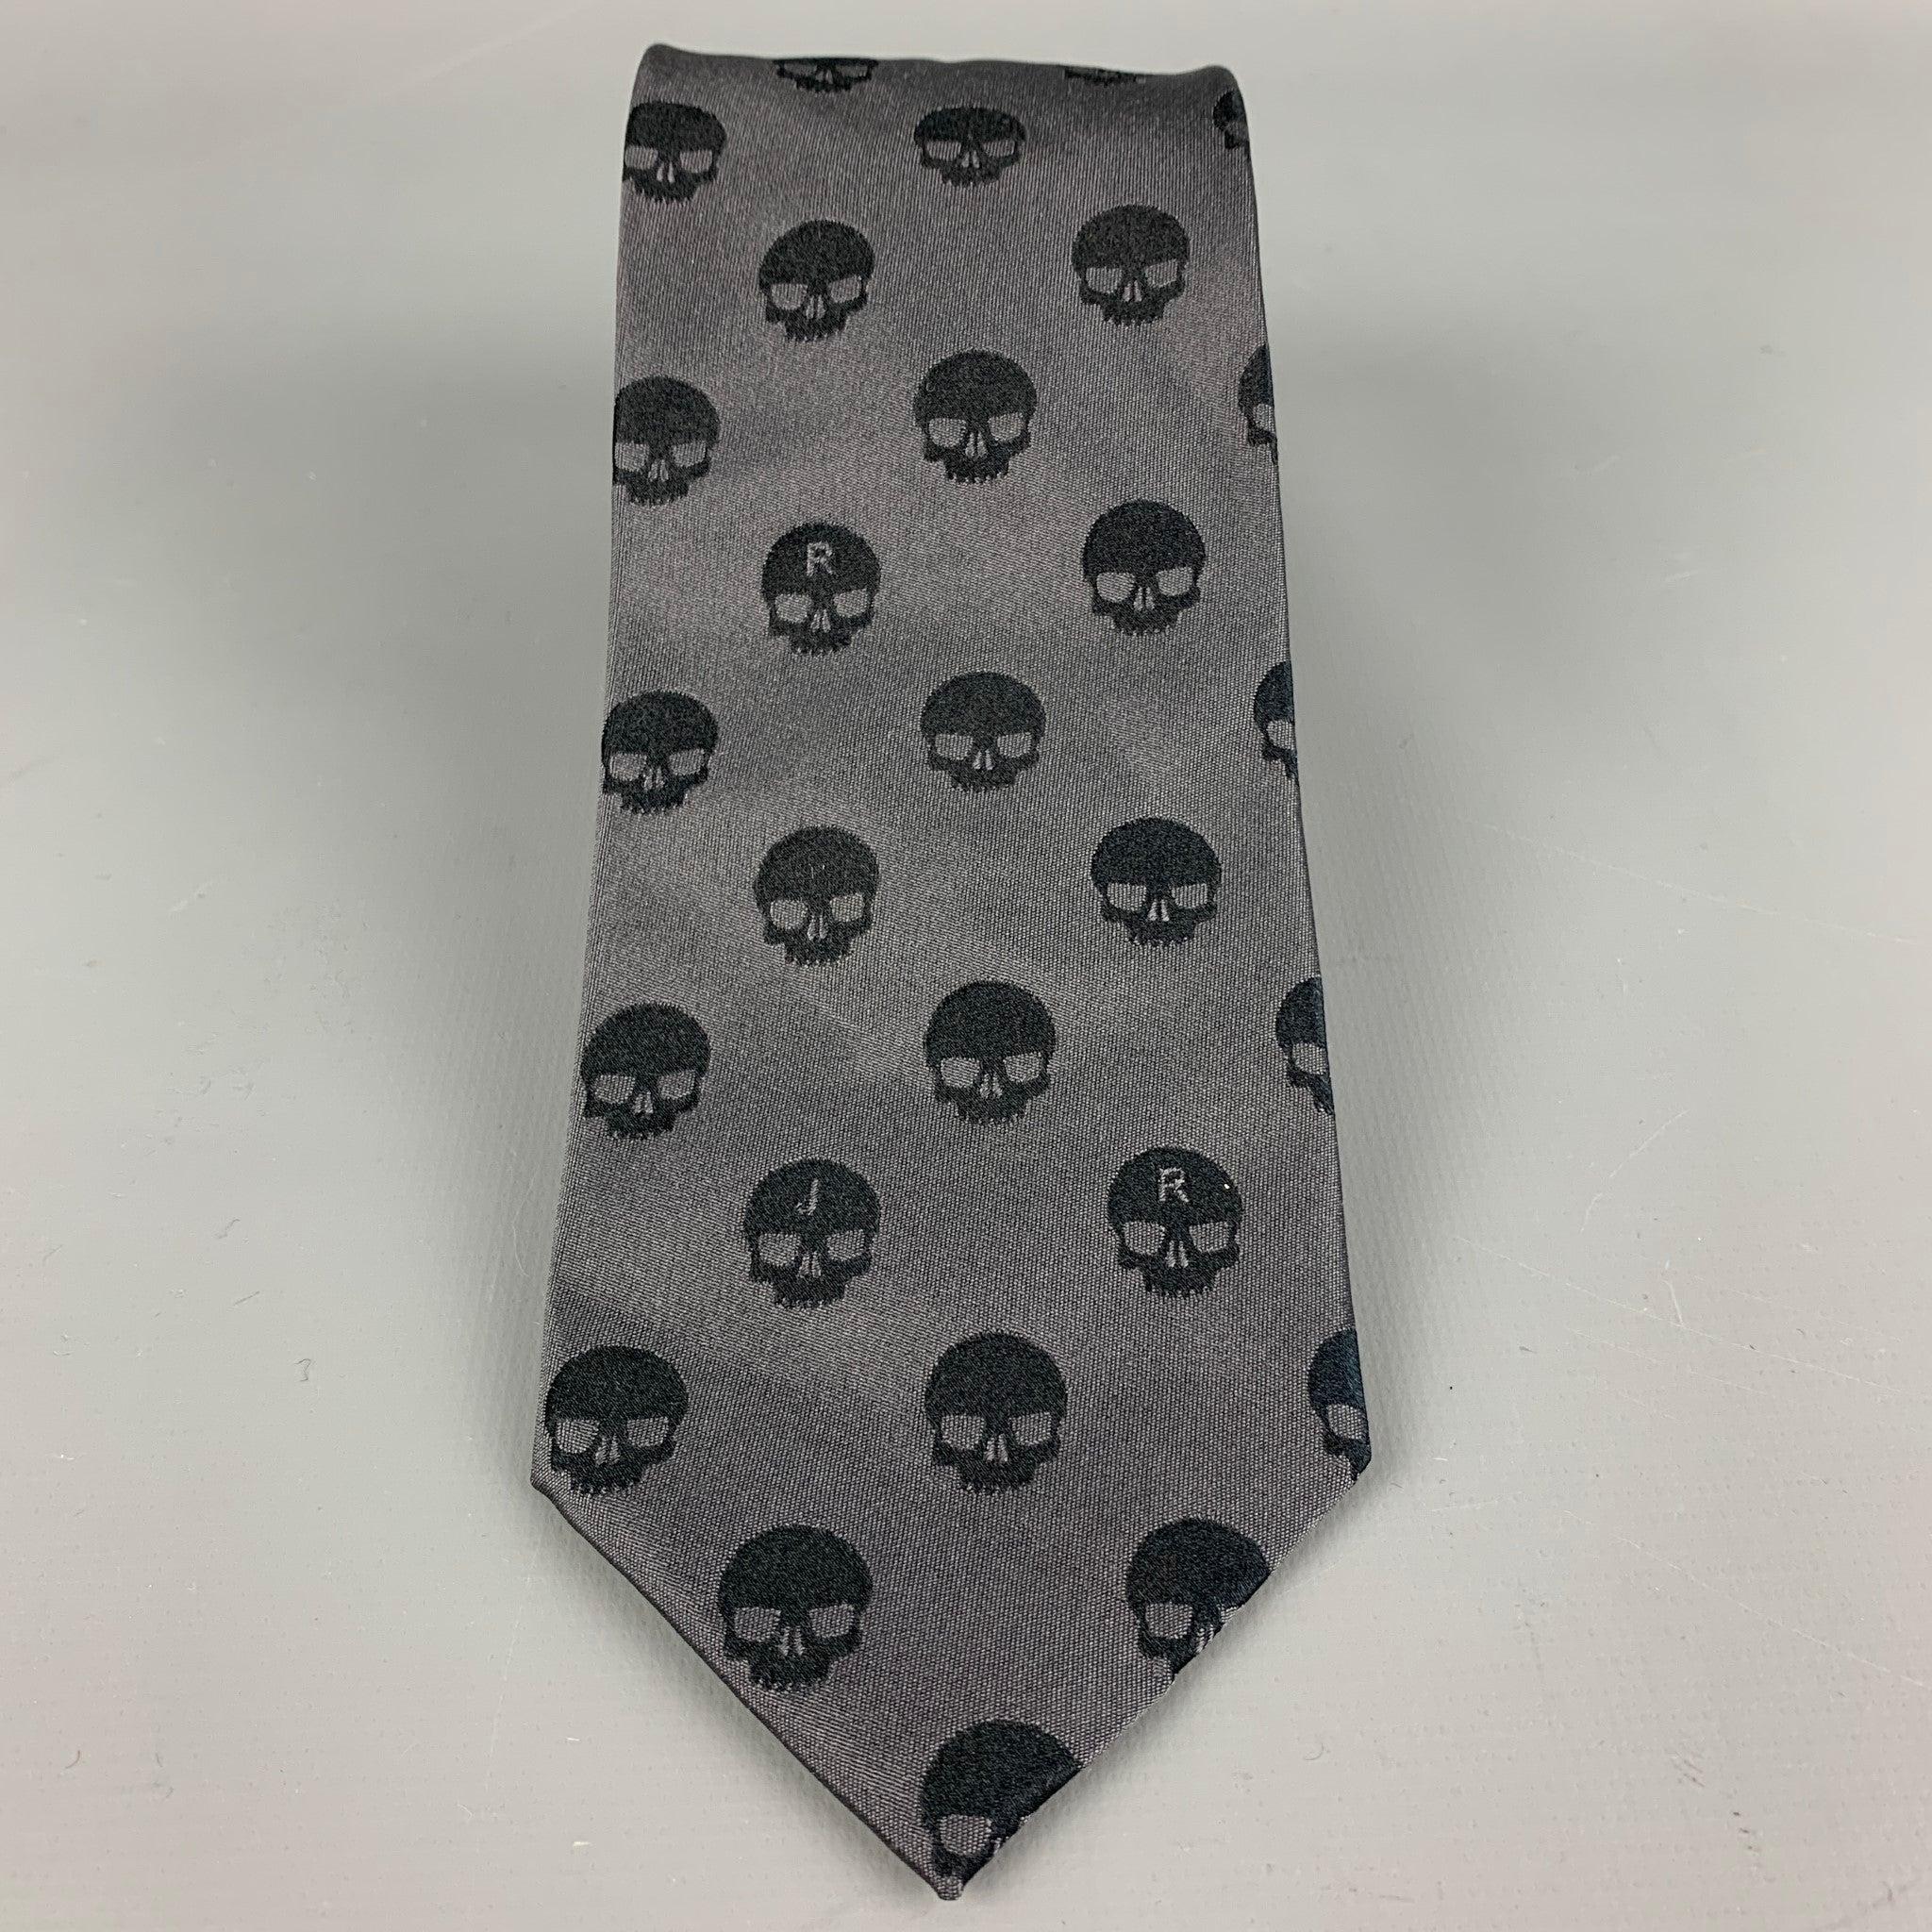 JOHN RICHMOND neck tie comes in a charcoal skull print silk. Made in Italy. Very Good
Pre-Owned Condition. 

Measurements: 
  Width: 3.25 inches 

  
  
 
Reference: 111348
Category: Tie
More Details
    
Brand:  JOHN RICHMOND
Color: 